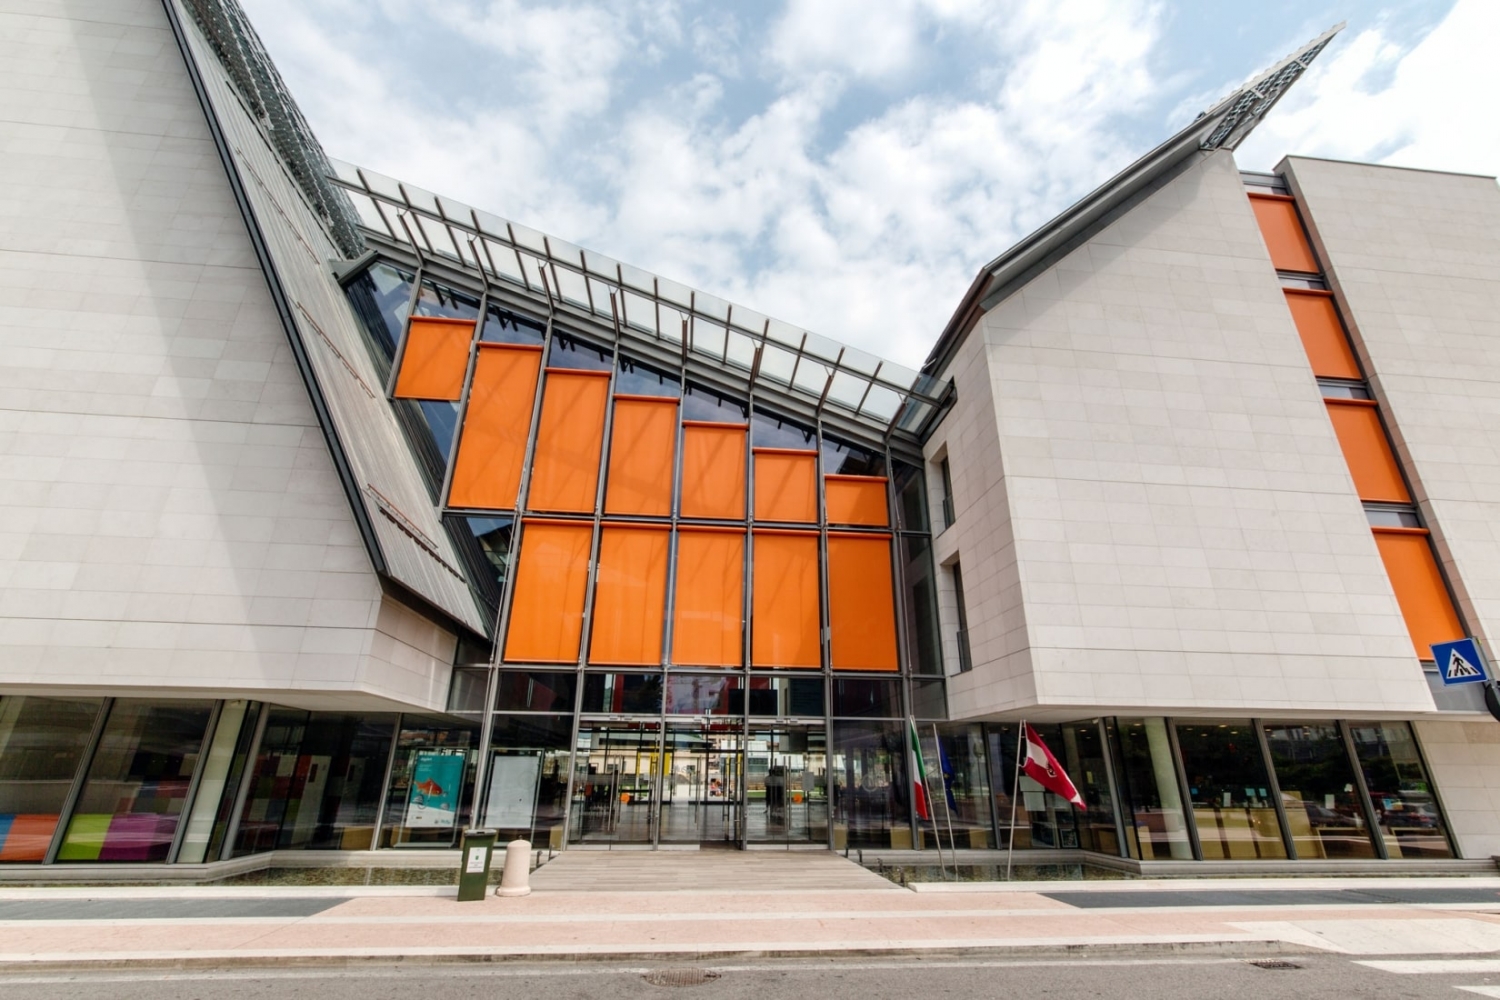 Science Museum in Trento with external facade blinds